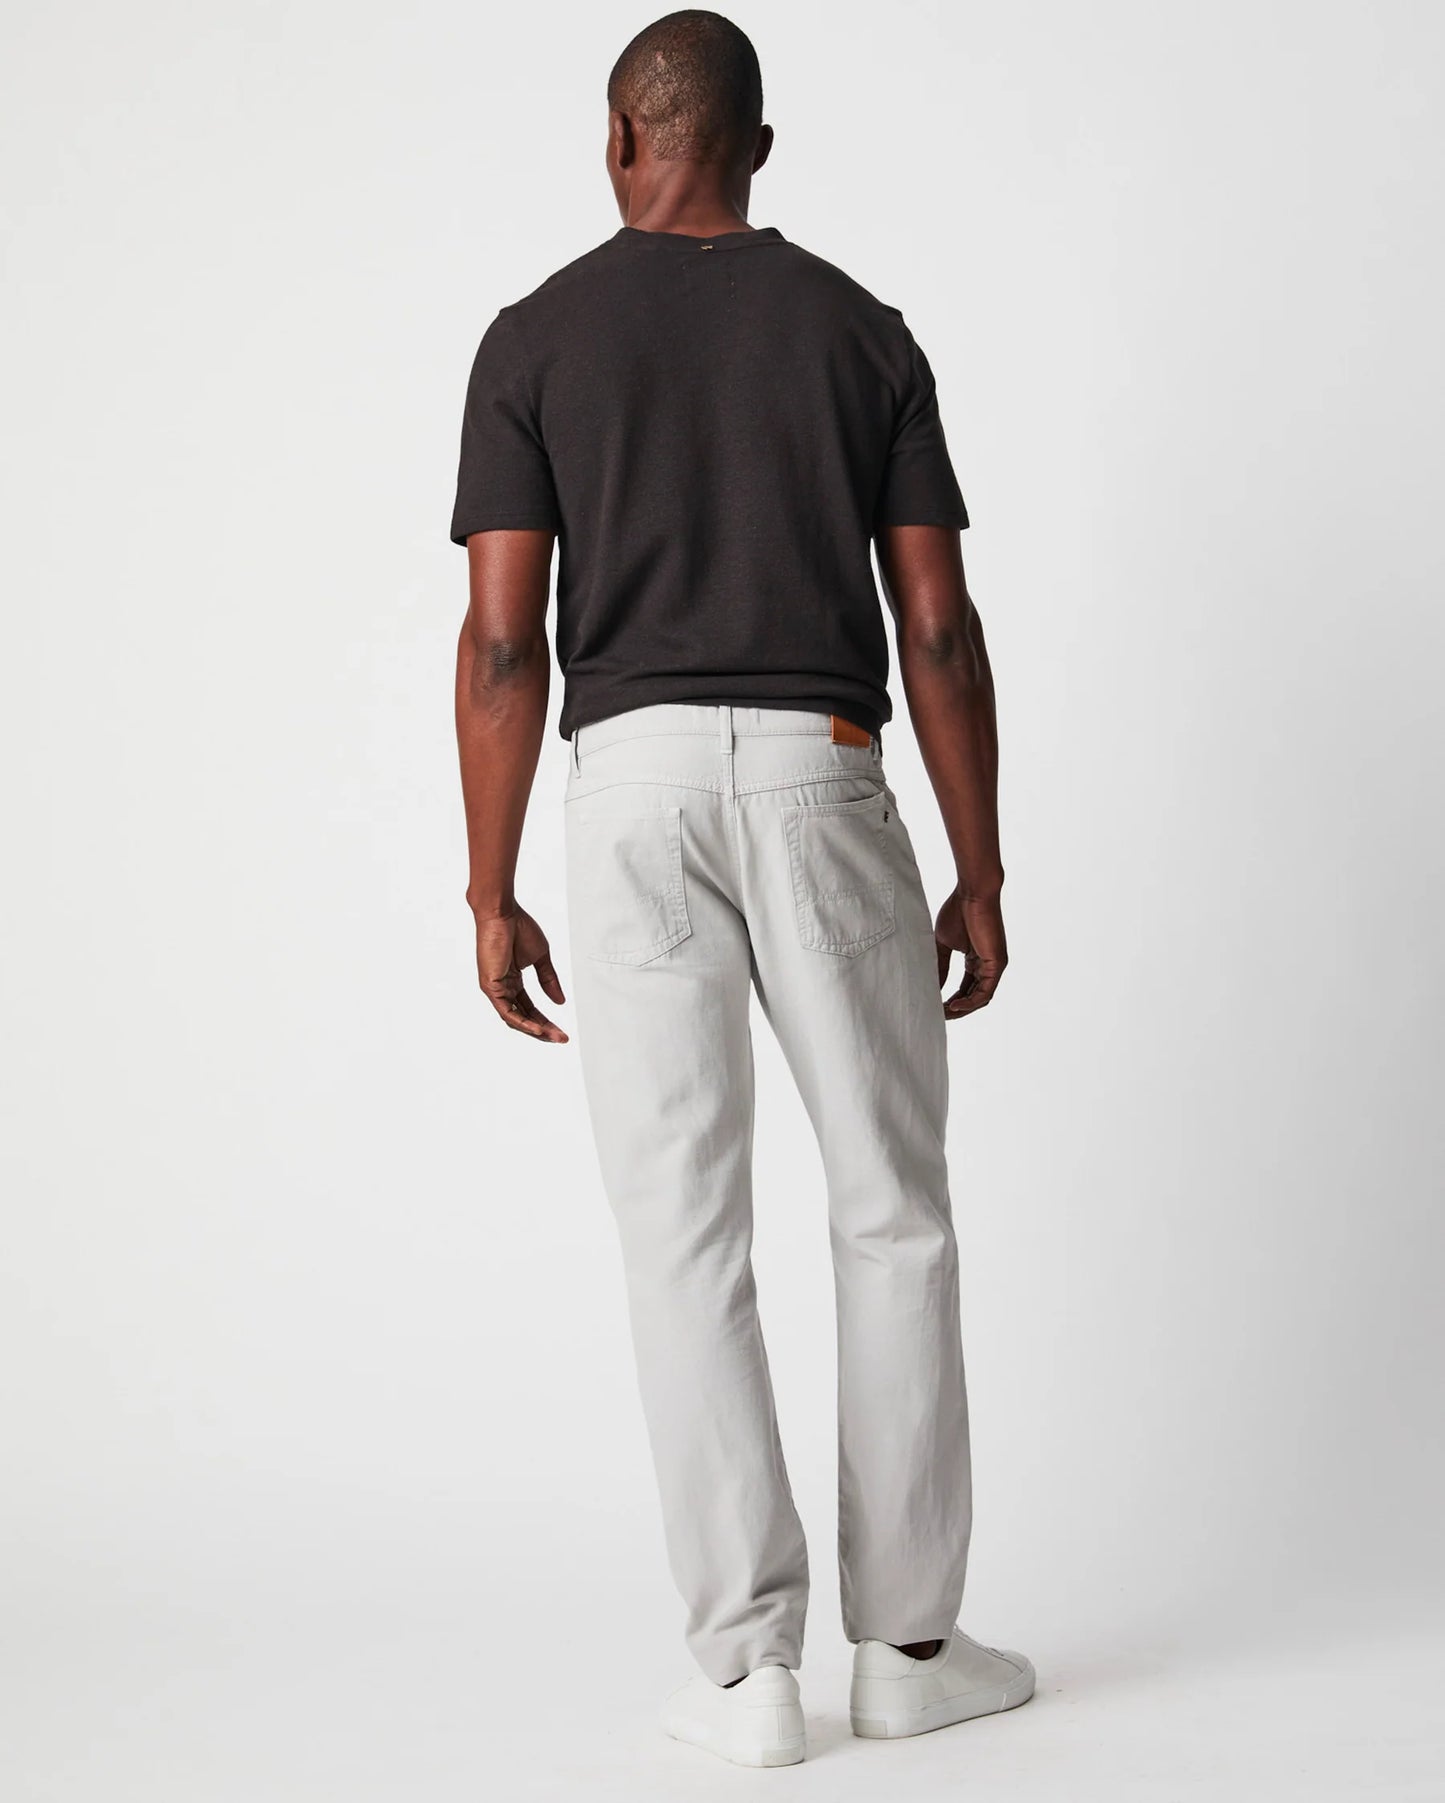 Back view of the Billy Reid Cotton Linen 5 Pocket Pant in the color Quarry